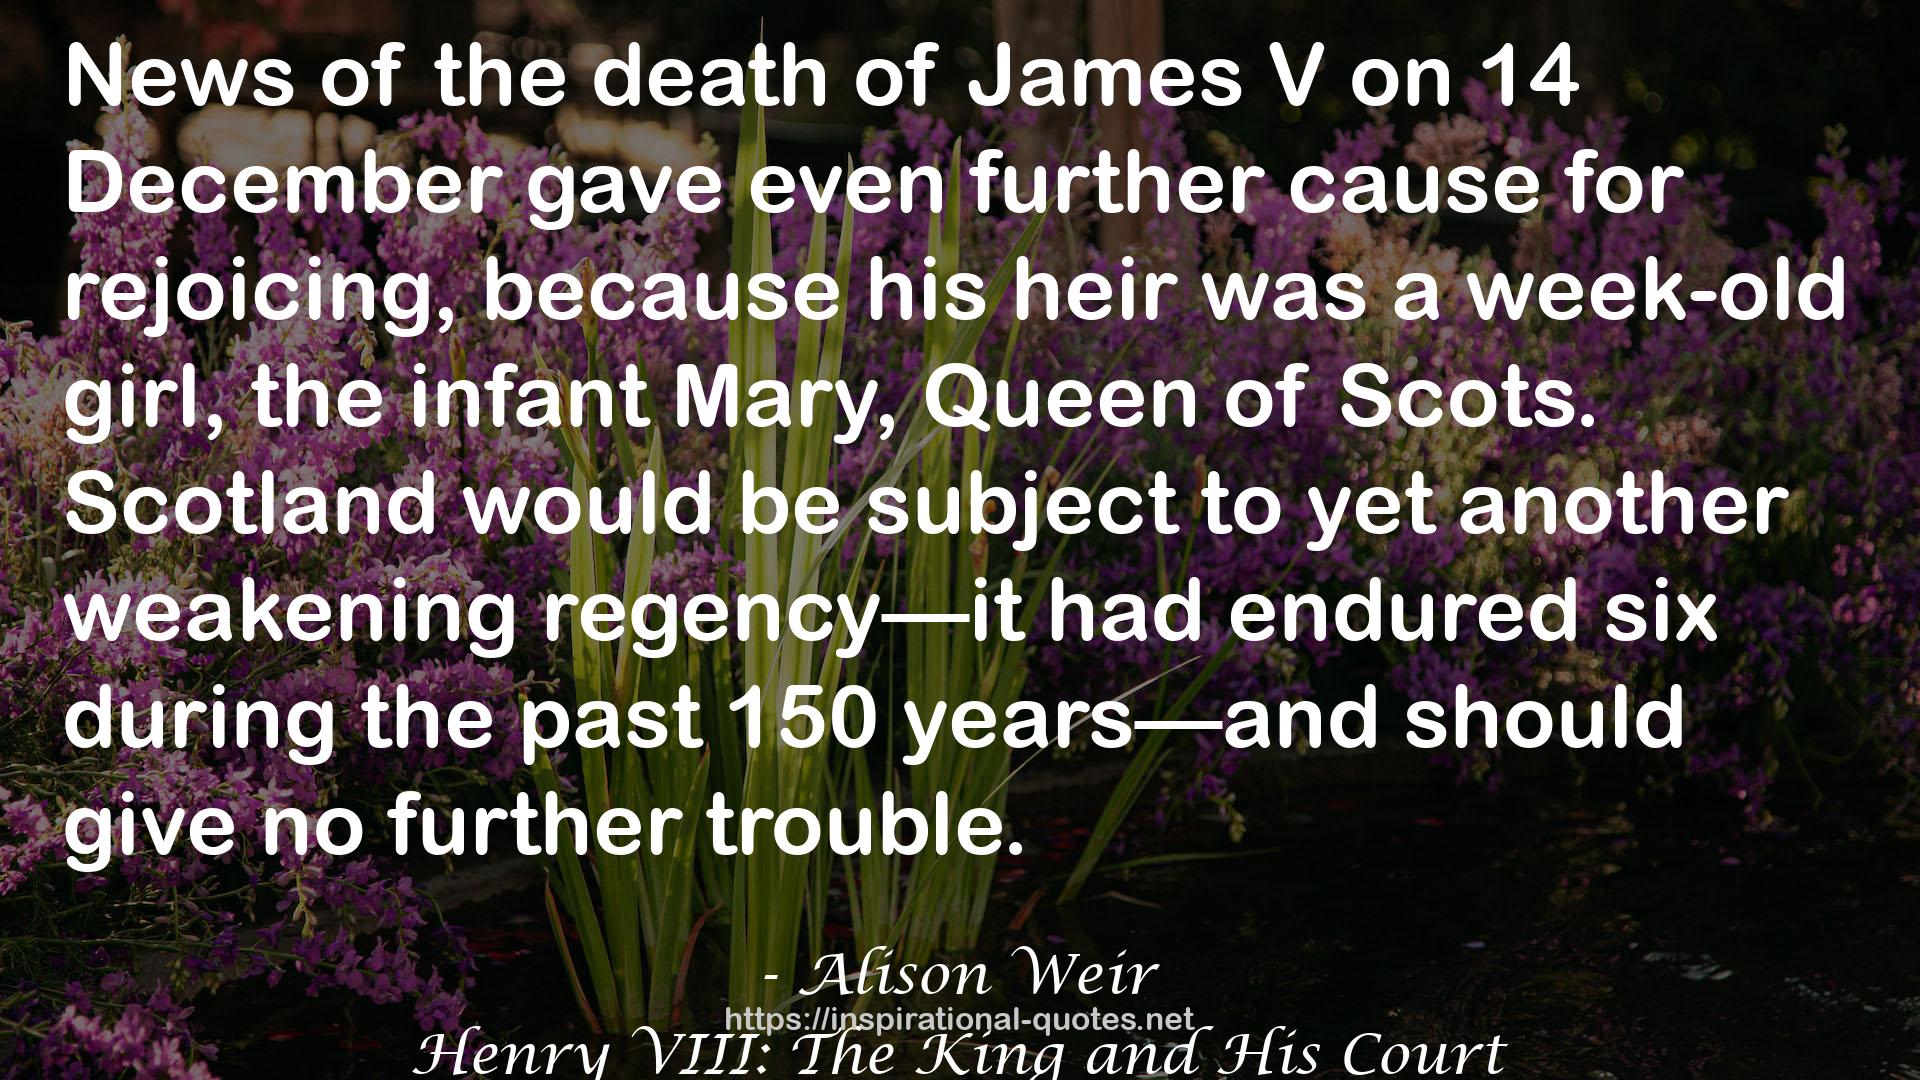 Henry VIII: The King and His Court QUOTES